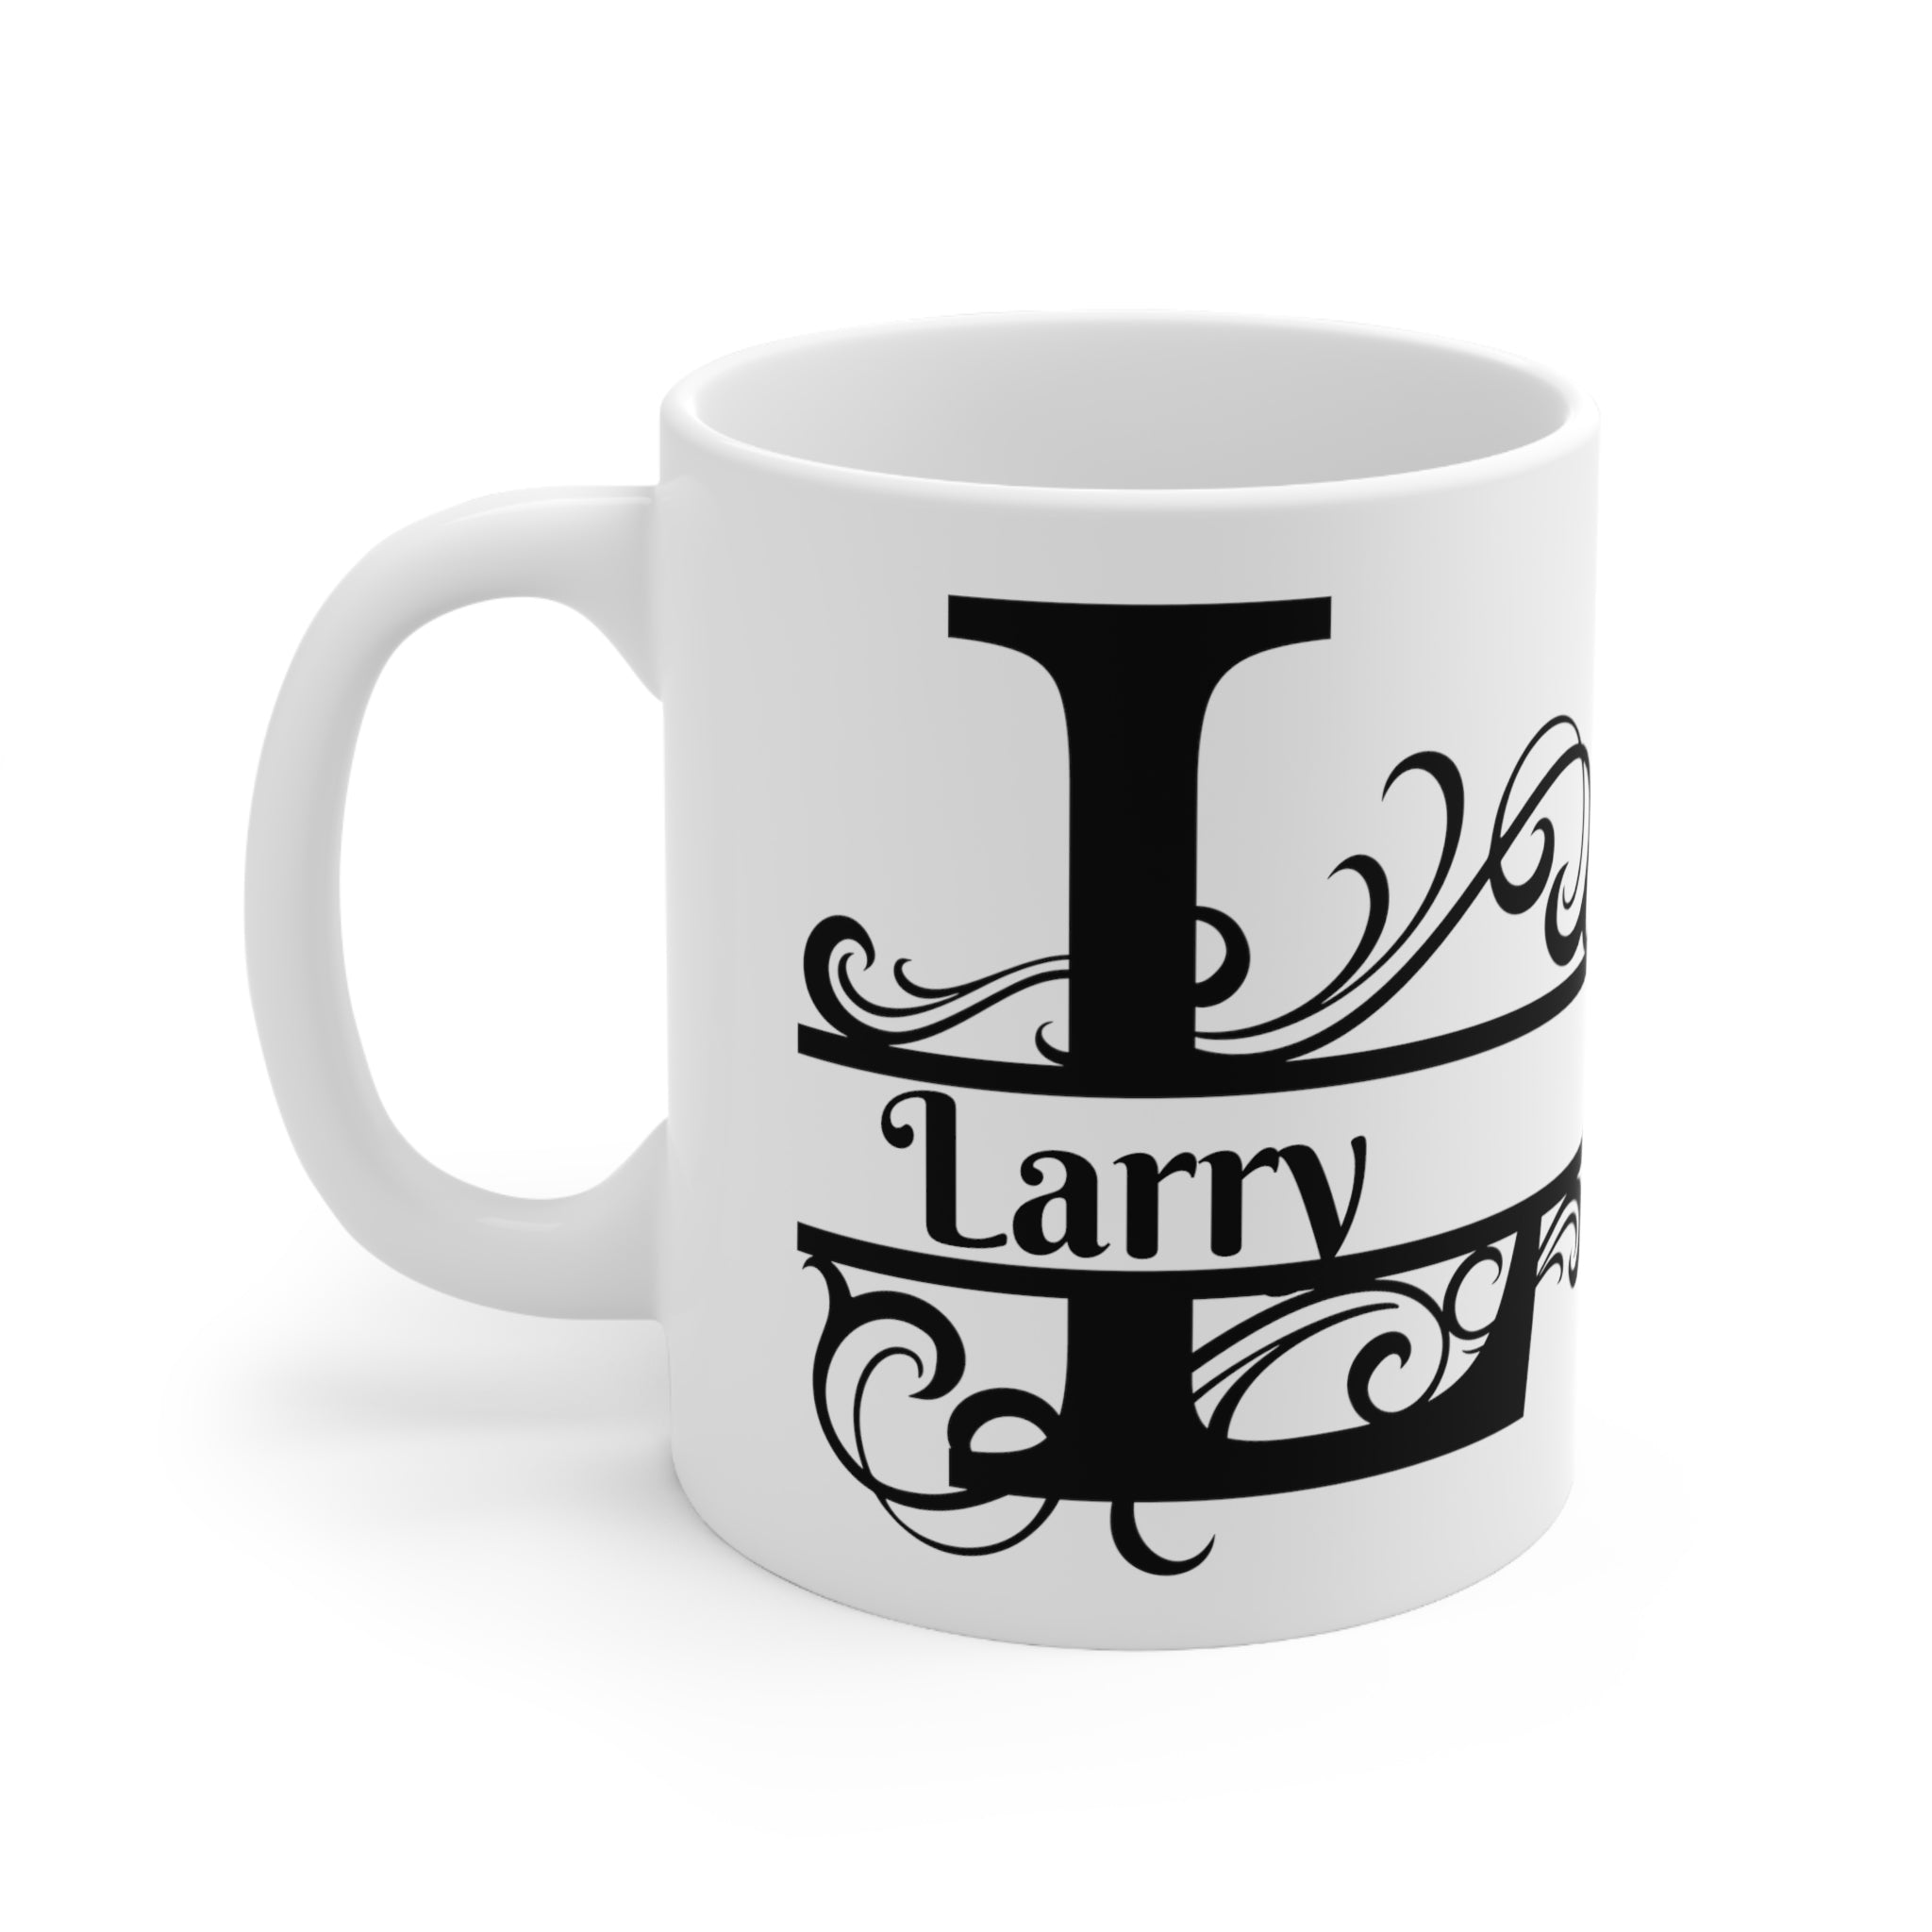 Customize a Mug for a Loved One with this Personalized Name and Initial Ceramic Mug 11oz - Custom Coffee Cup for Gift, Monogrammed Drinkware, Unique Morning Brew Accessory